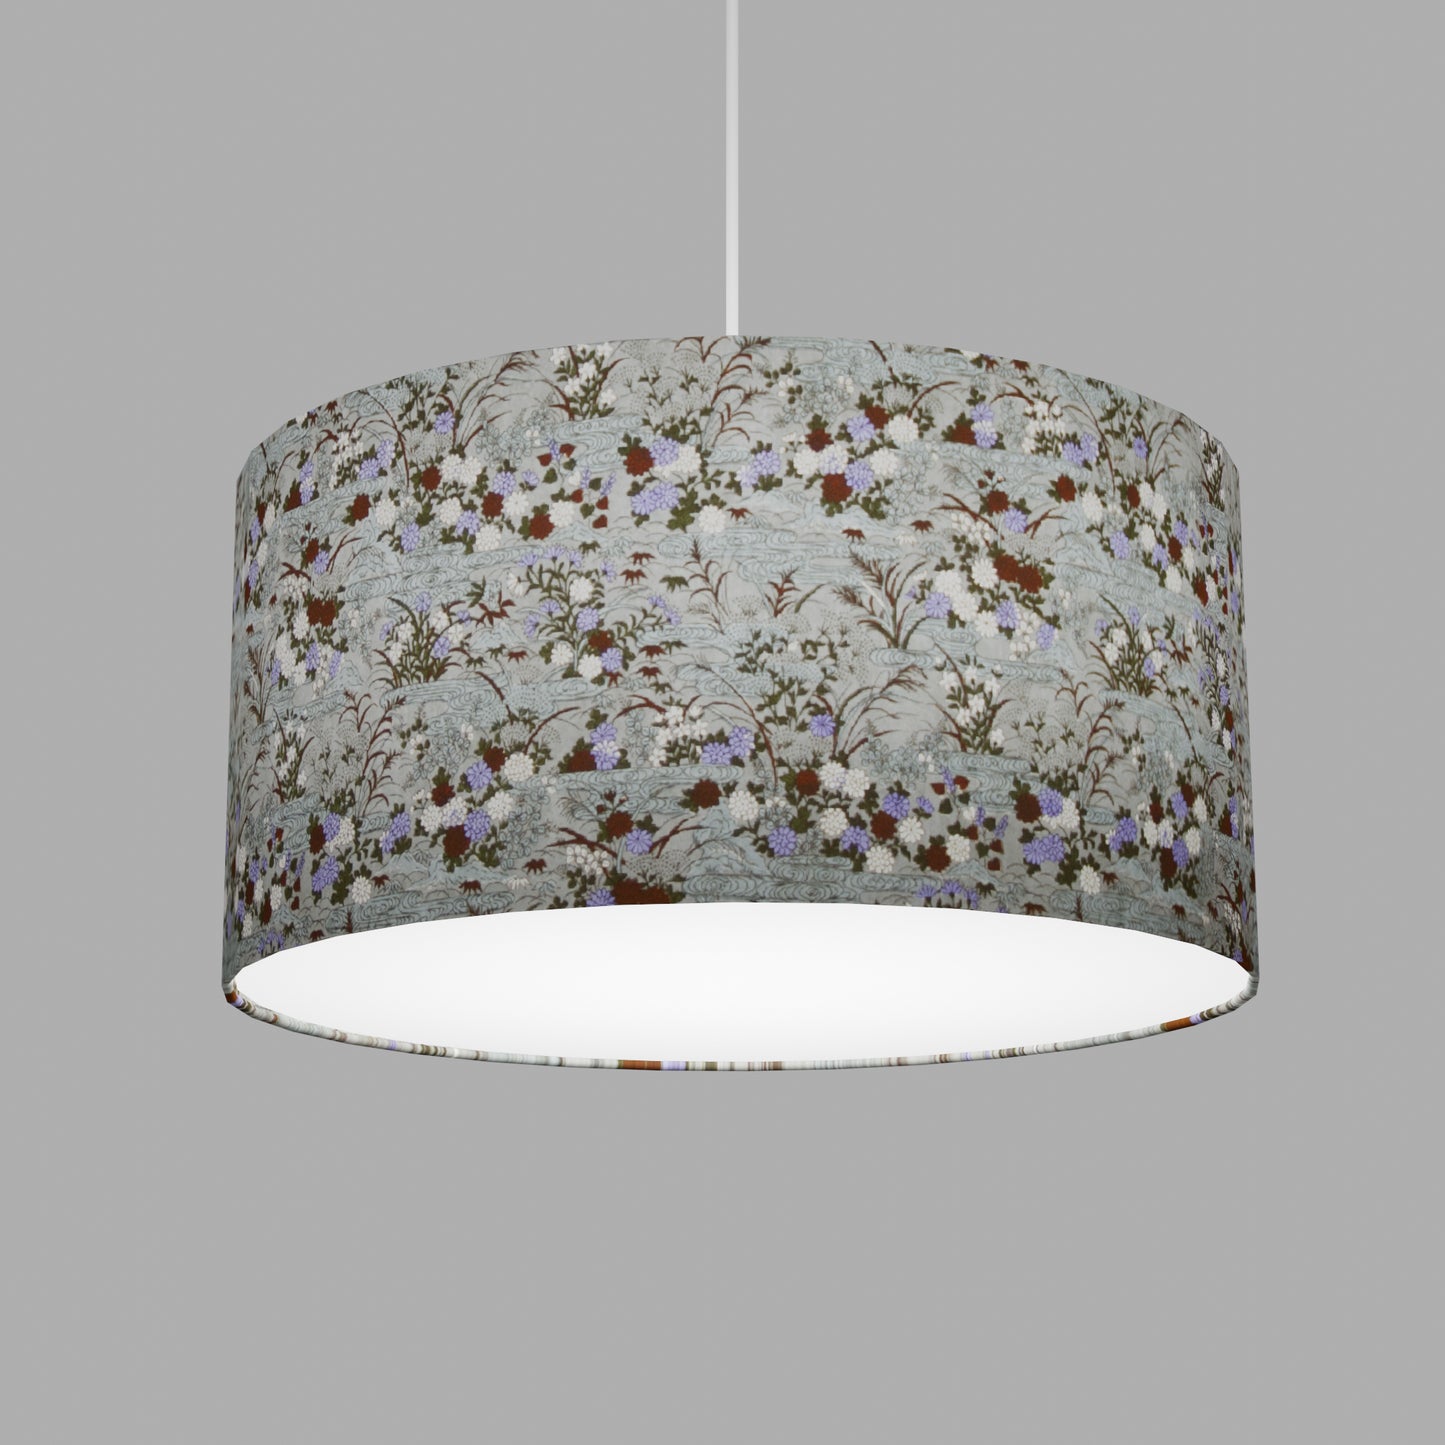 Drum Lamp Shade - W08 ~ Lily Pond, 40cm(d) x 20cm(h)